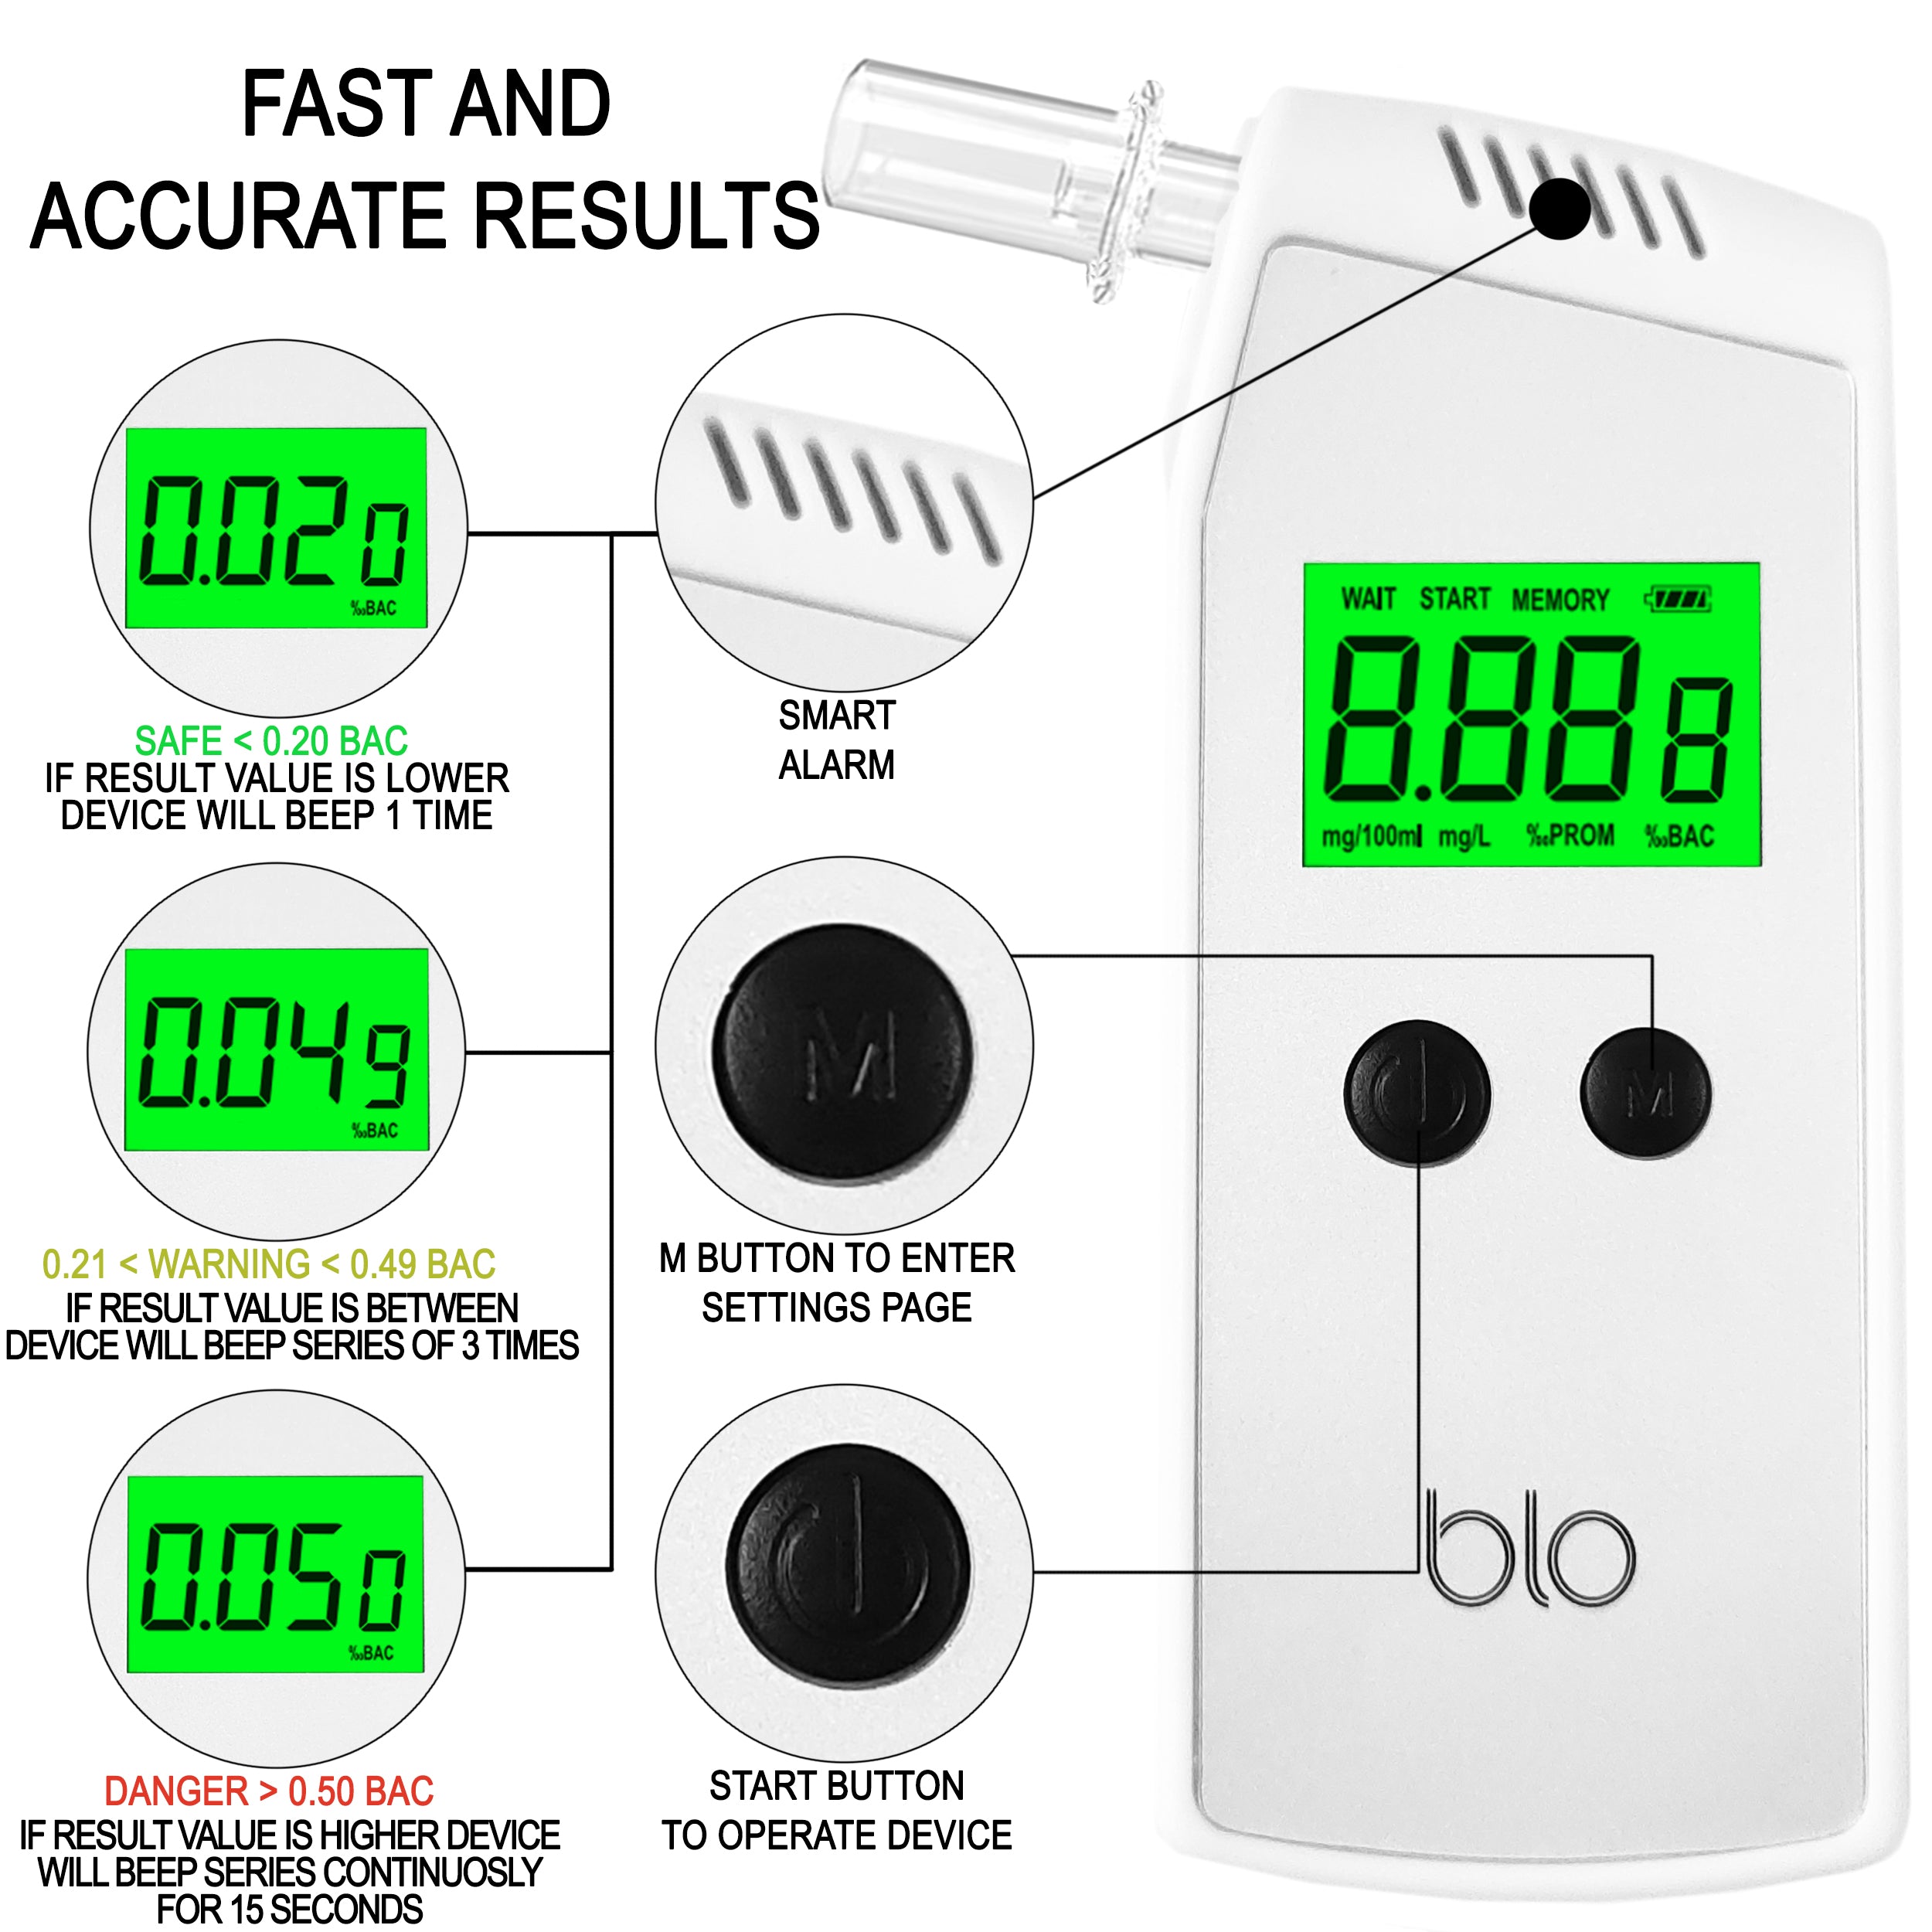 BLO Alcohol Breathalyser & Mouthpiece | Portable Breath Tester with Digital LCD Screen & Fast EXECUTIVE